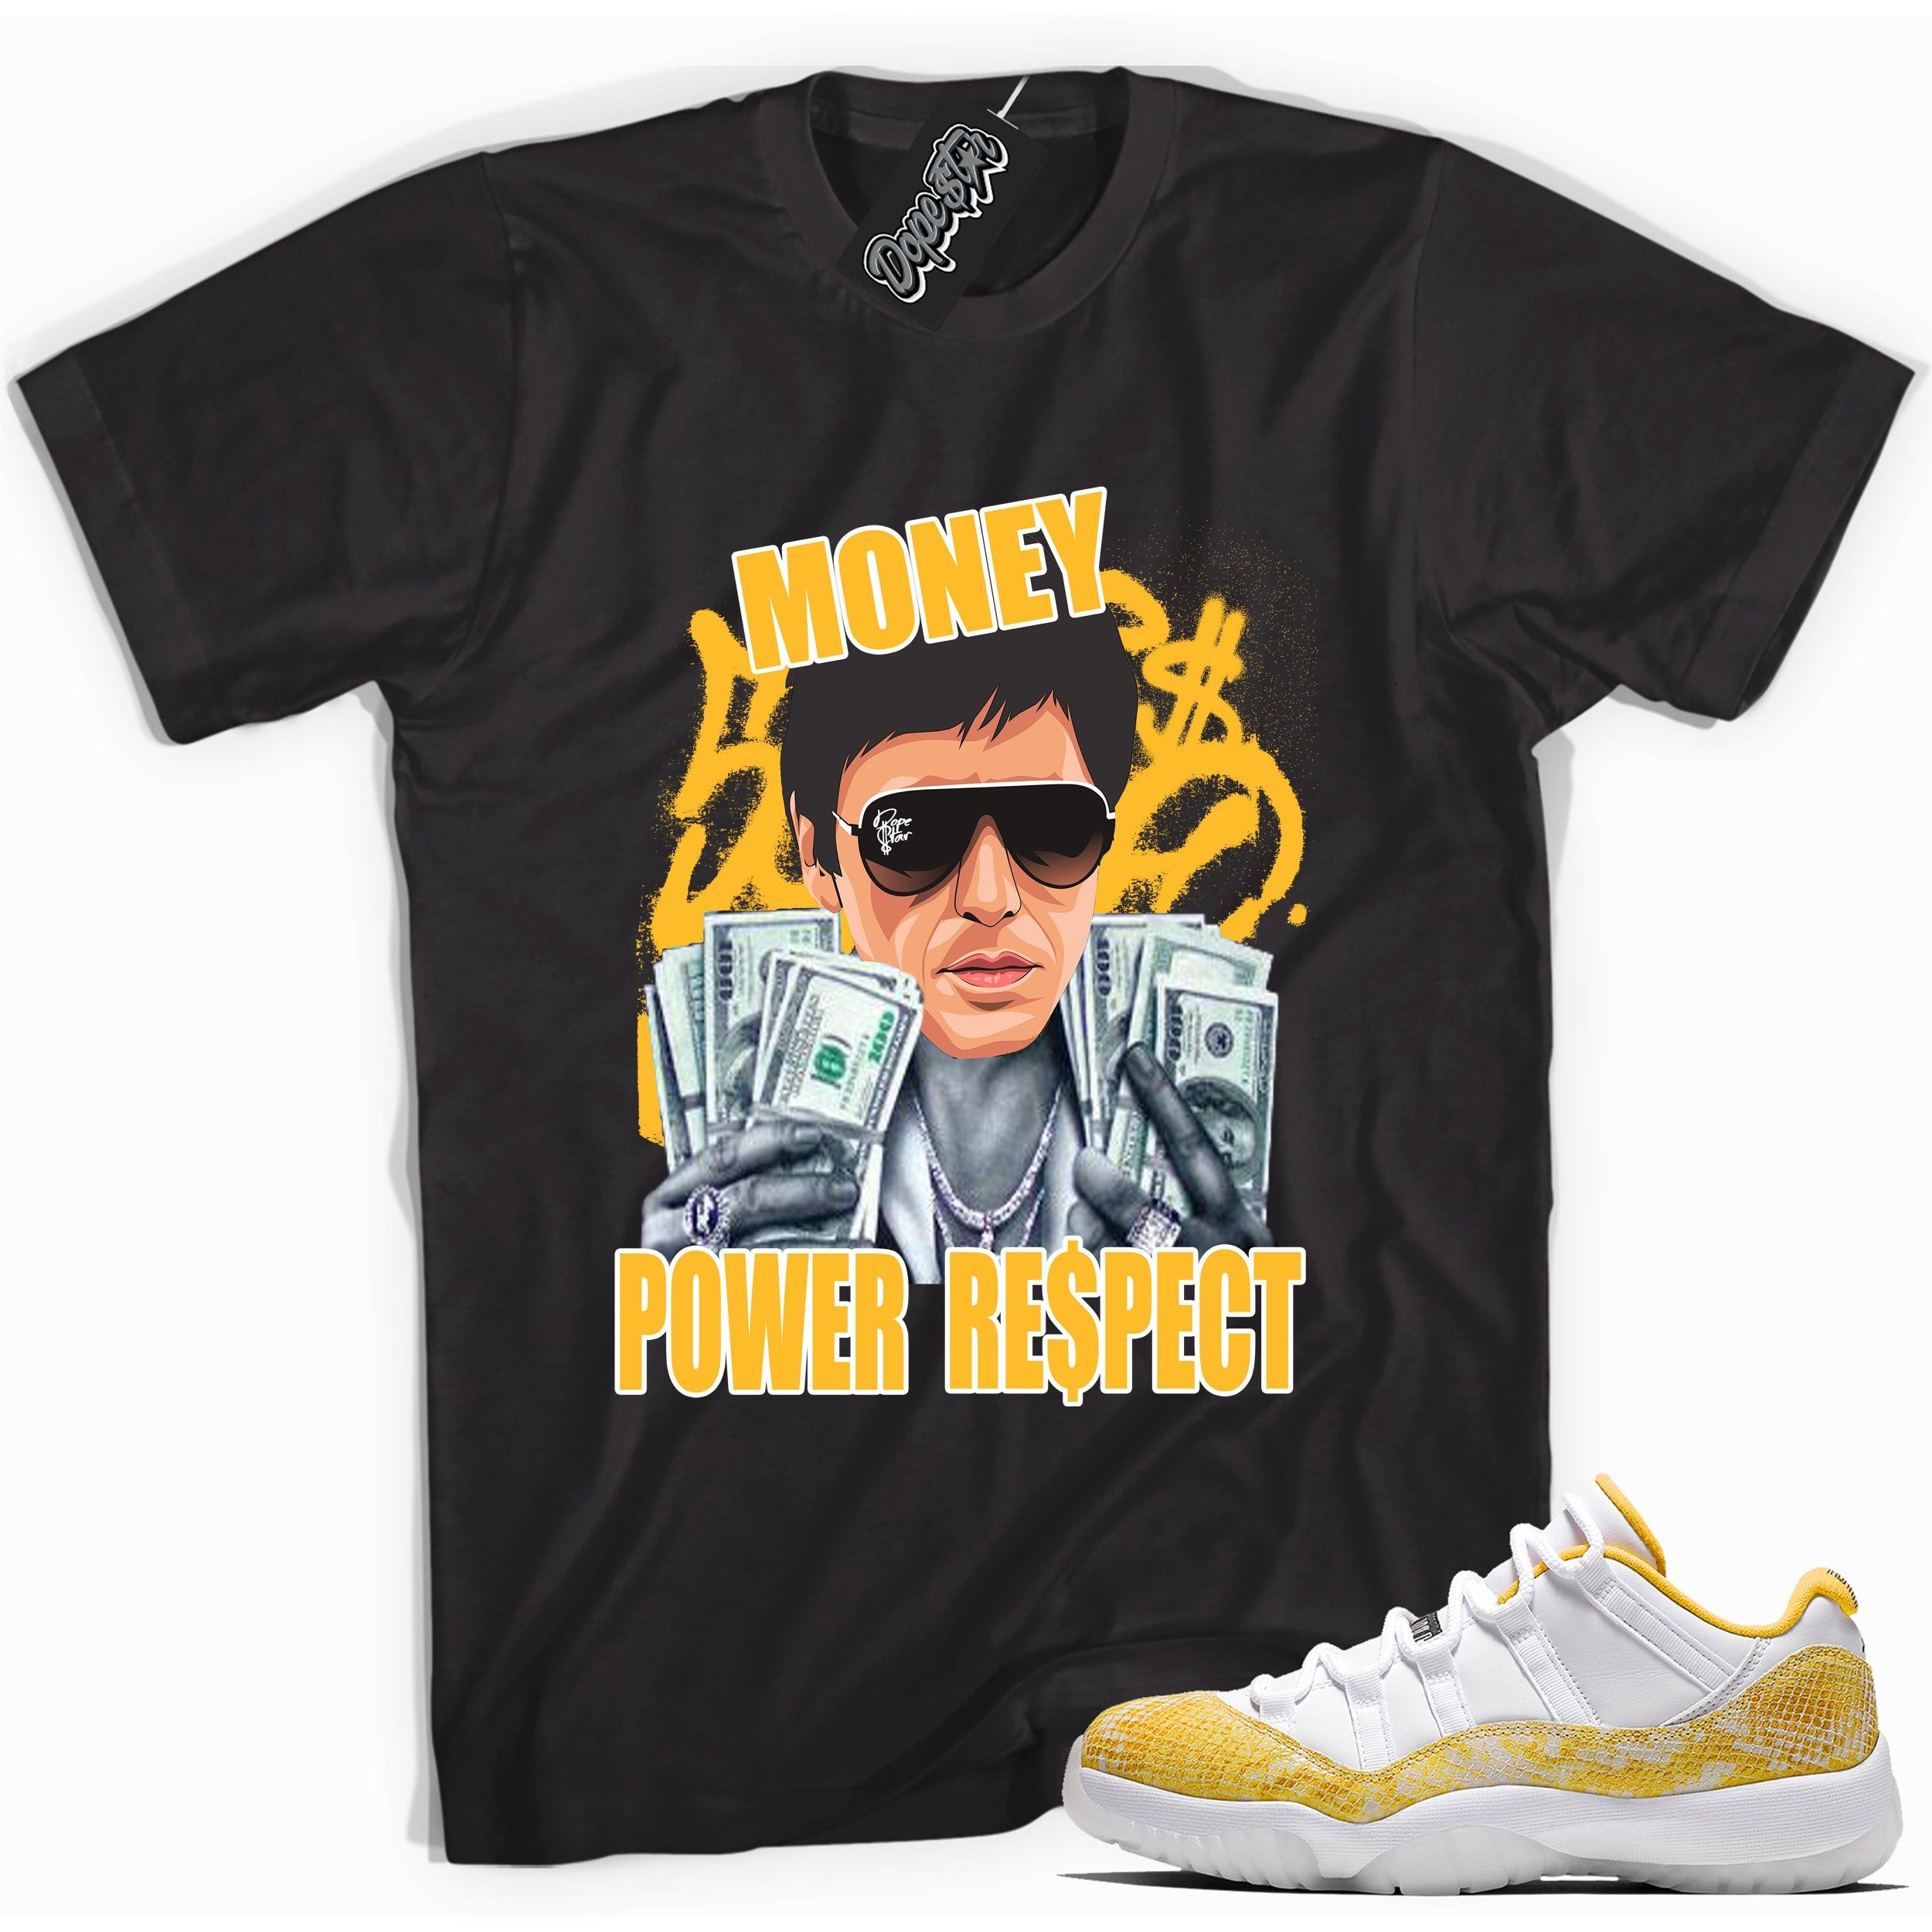 Cool black graphic tee with 'money power respect' print, that perfectly matches  Air Jordan 11 Retro Low Yellow Snakeskin sneakers